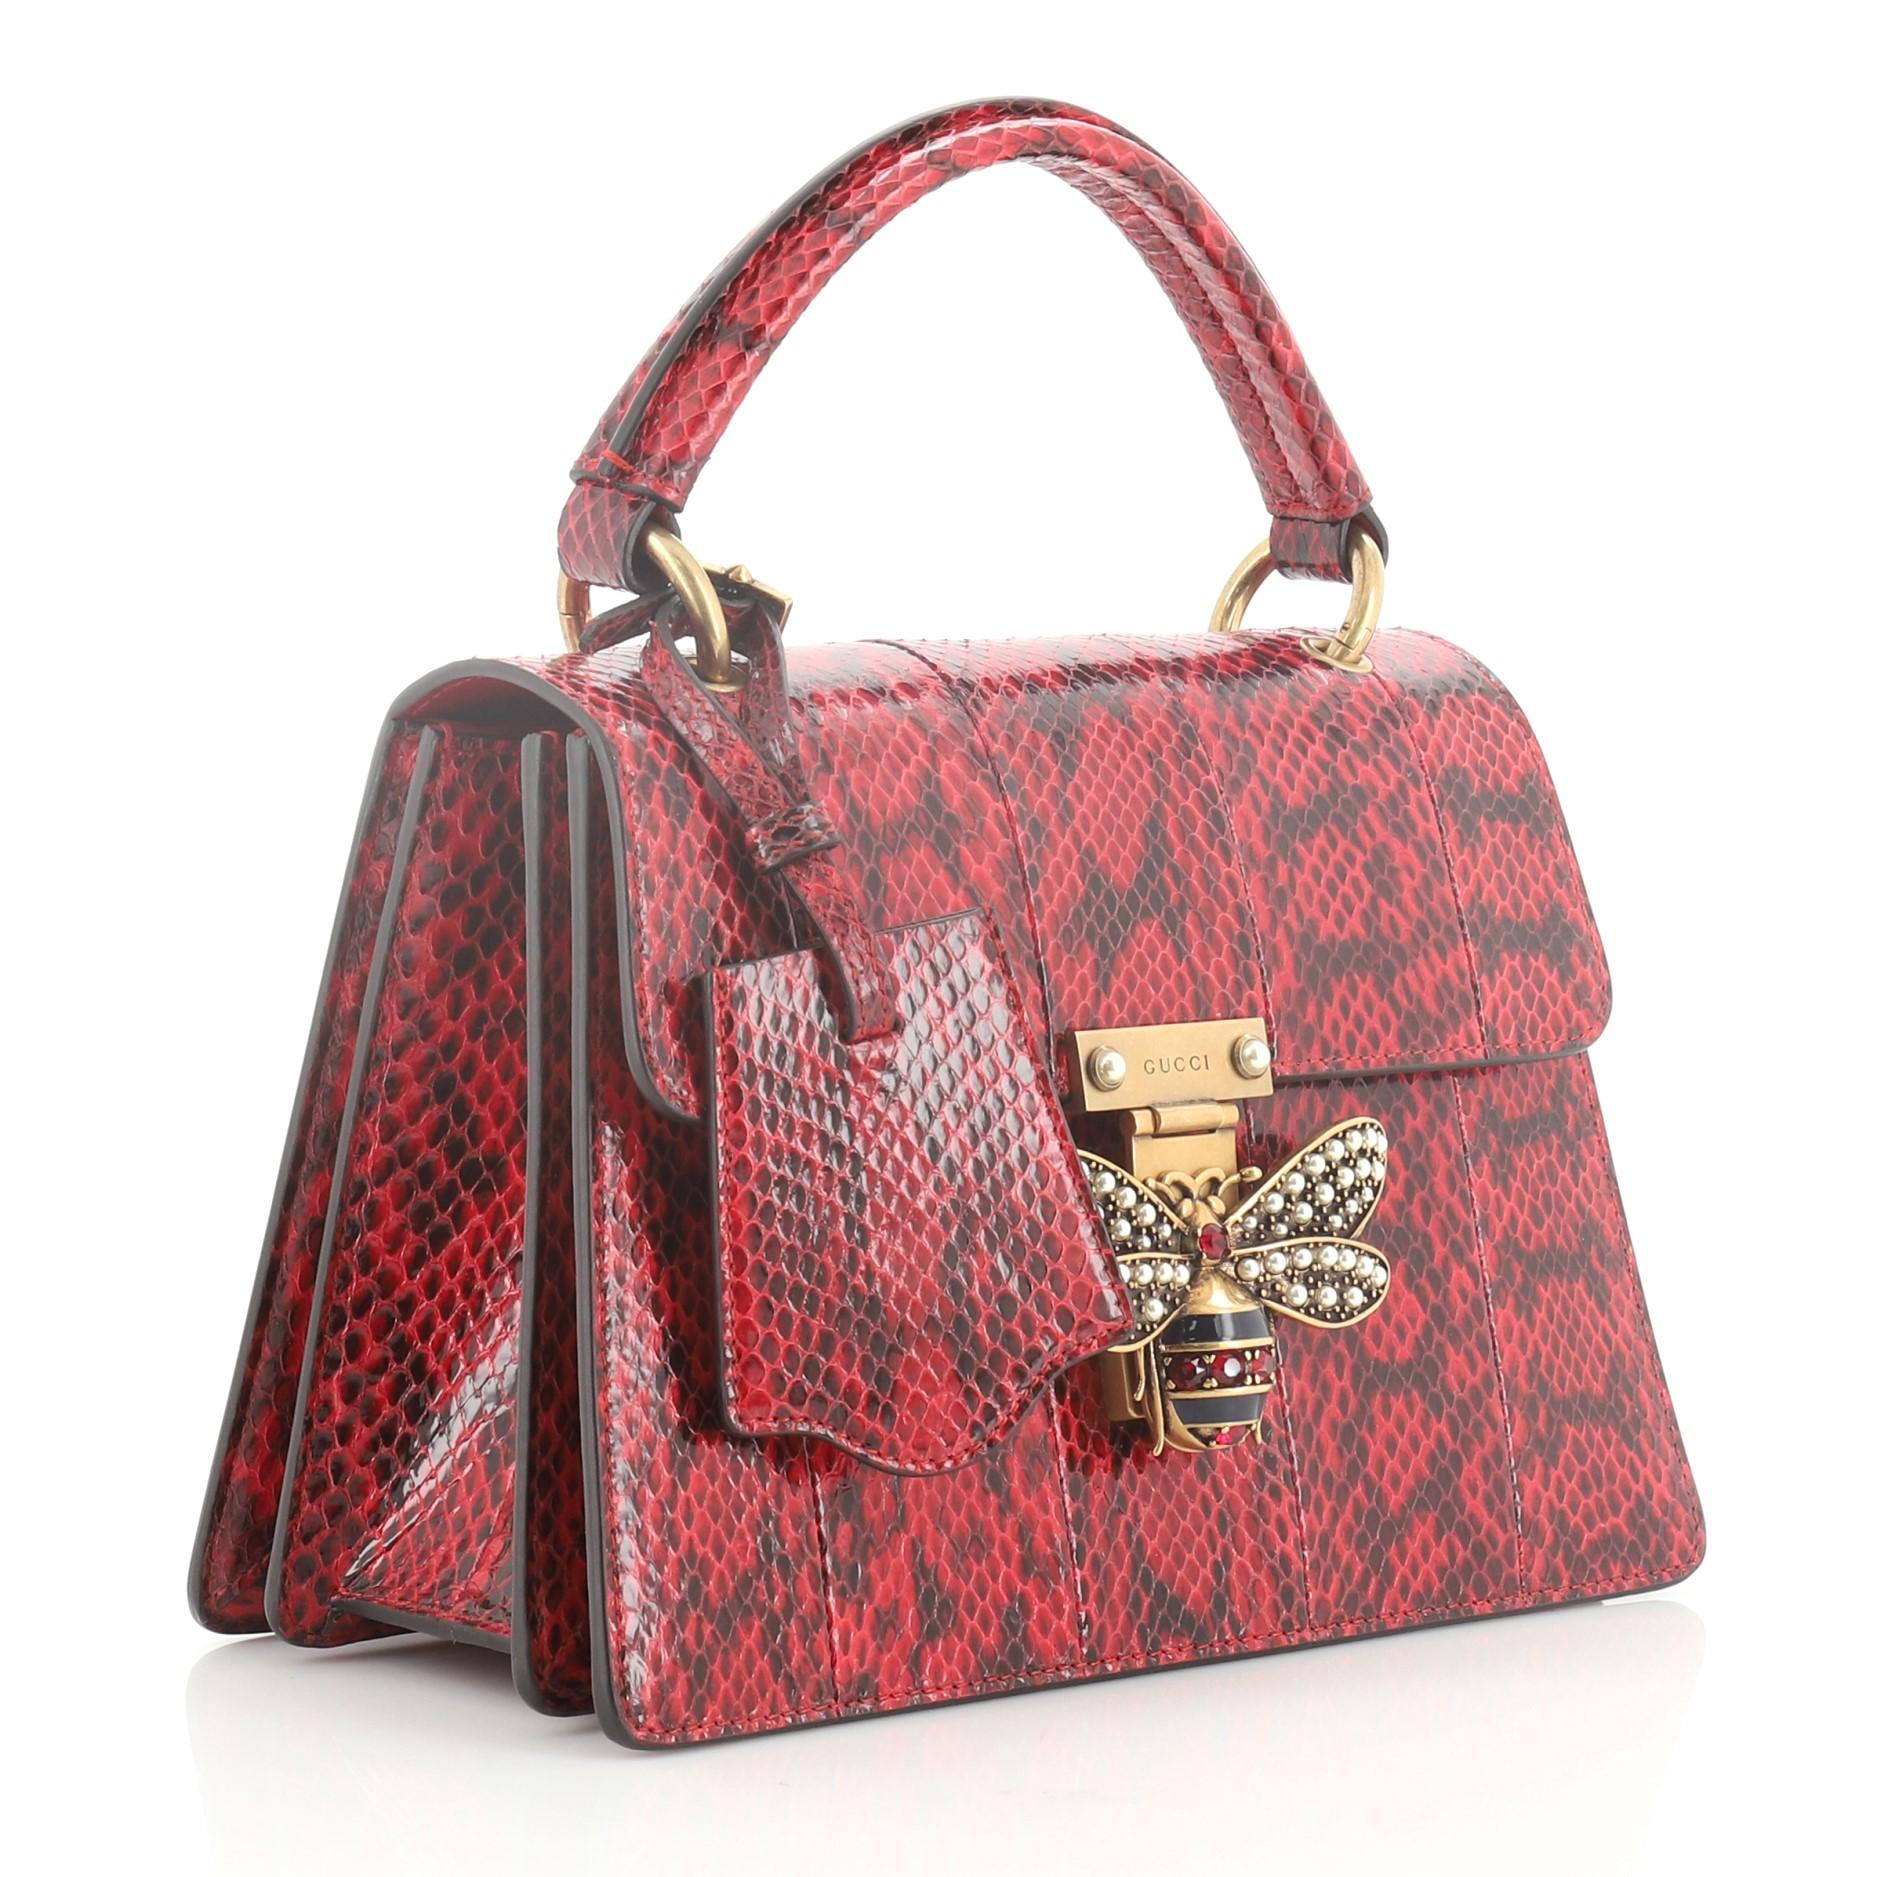 This Gucci Queen Margaret Top Handle Bag Snakeskin Small, crafted from genuine red snakeskin, features a leather top handle, bejeweled bee on its flap, and aged gold-tone hardware. It opens to a blue microfiber interior with three compartments and